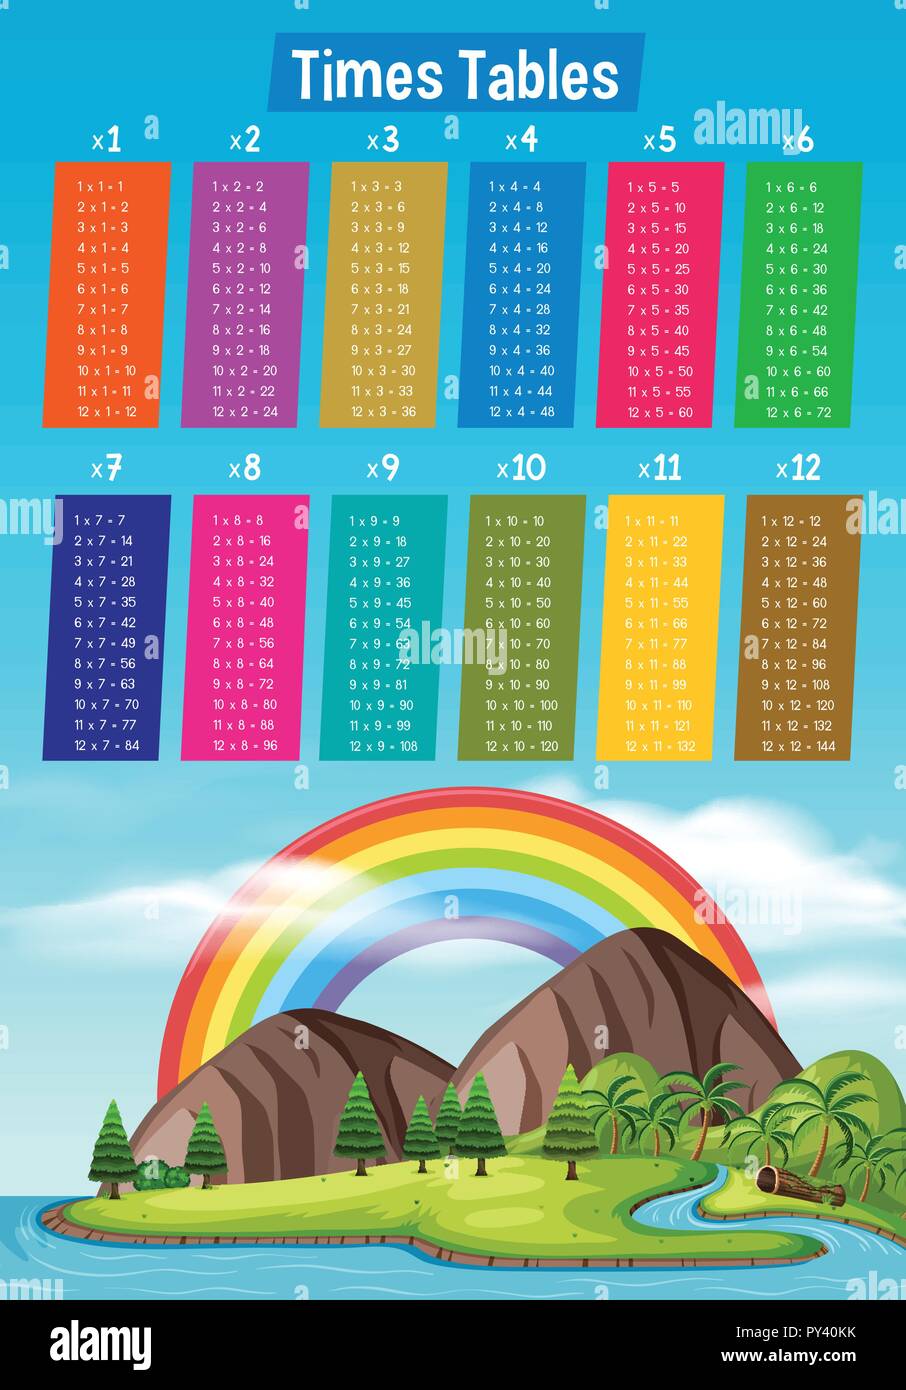 Times table poster with rainbow and island illustration Stock Vector